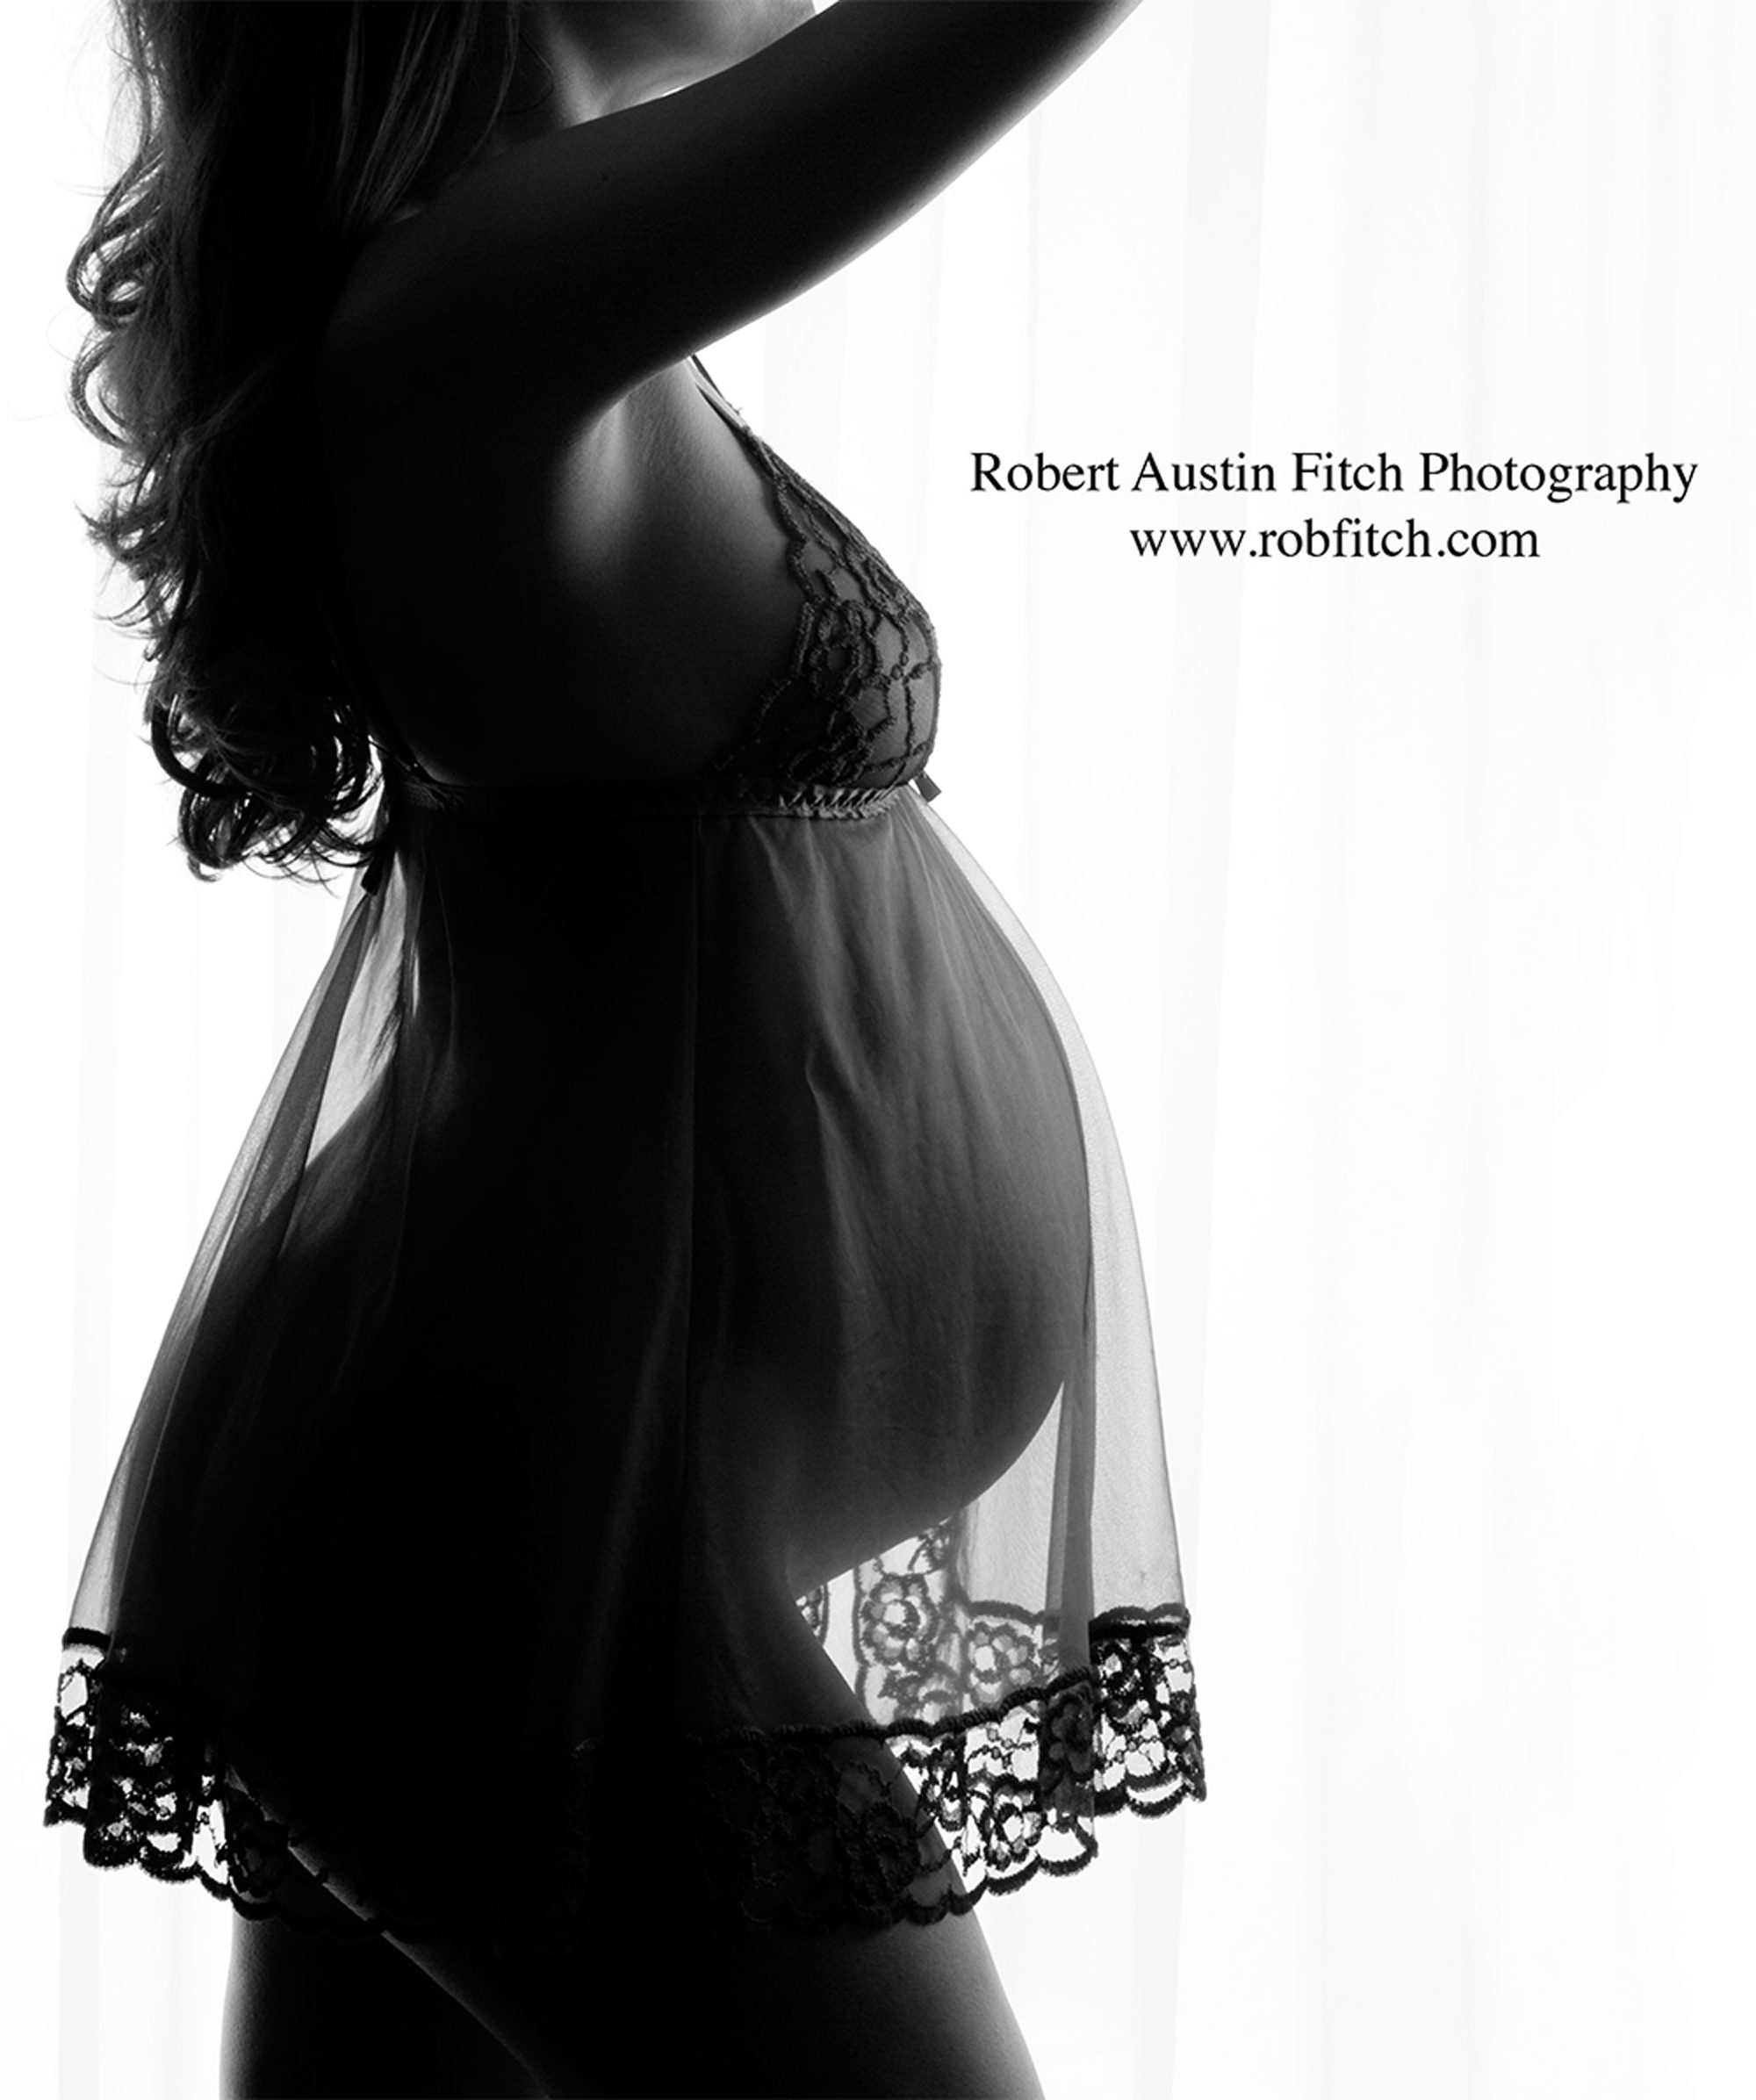 Black & white silhouette maternity photo of pregnant woman in black sheer negligee